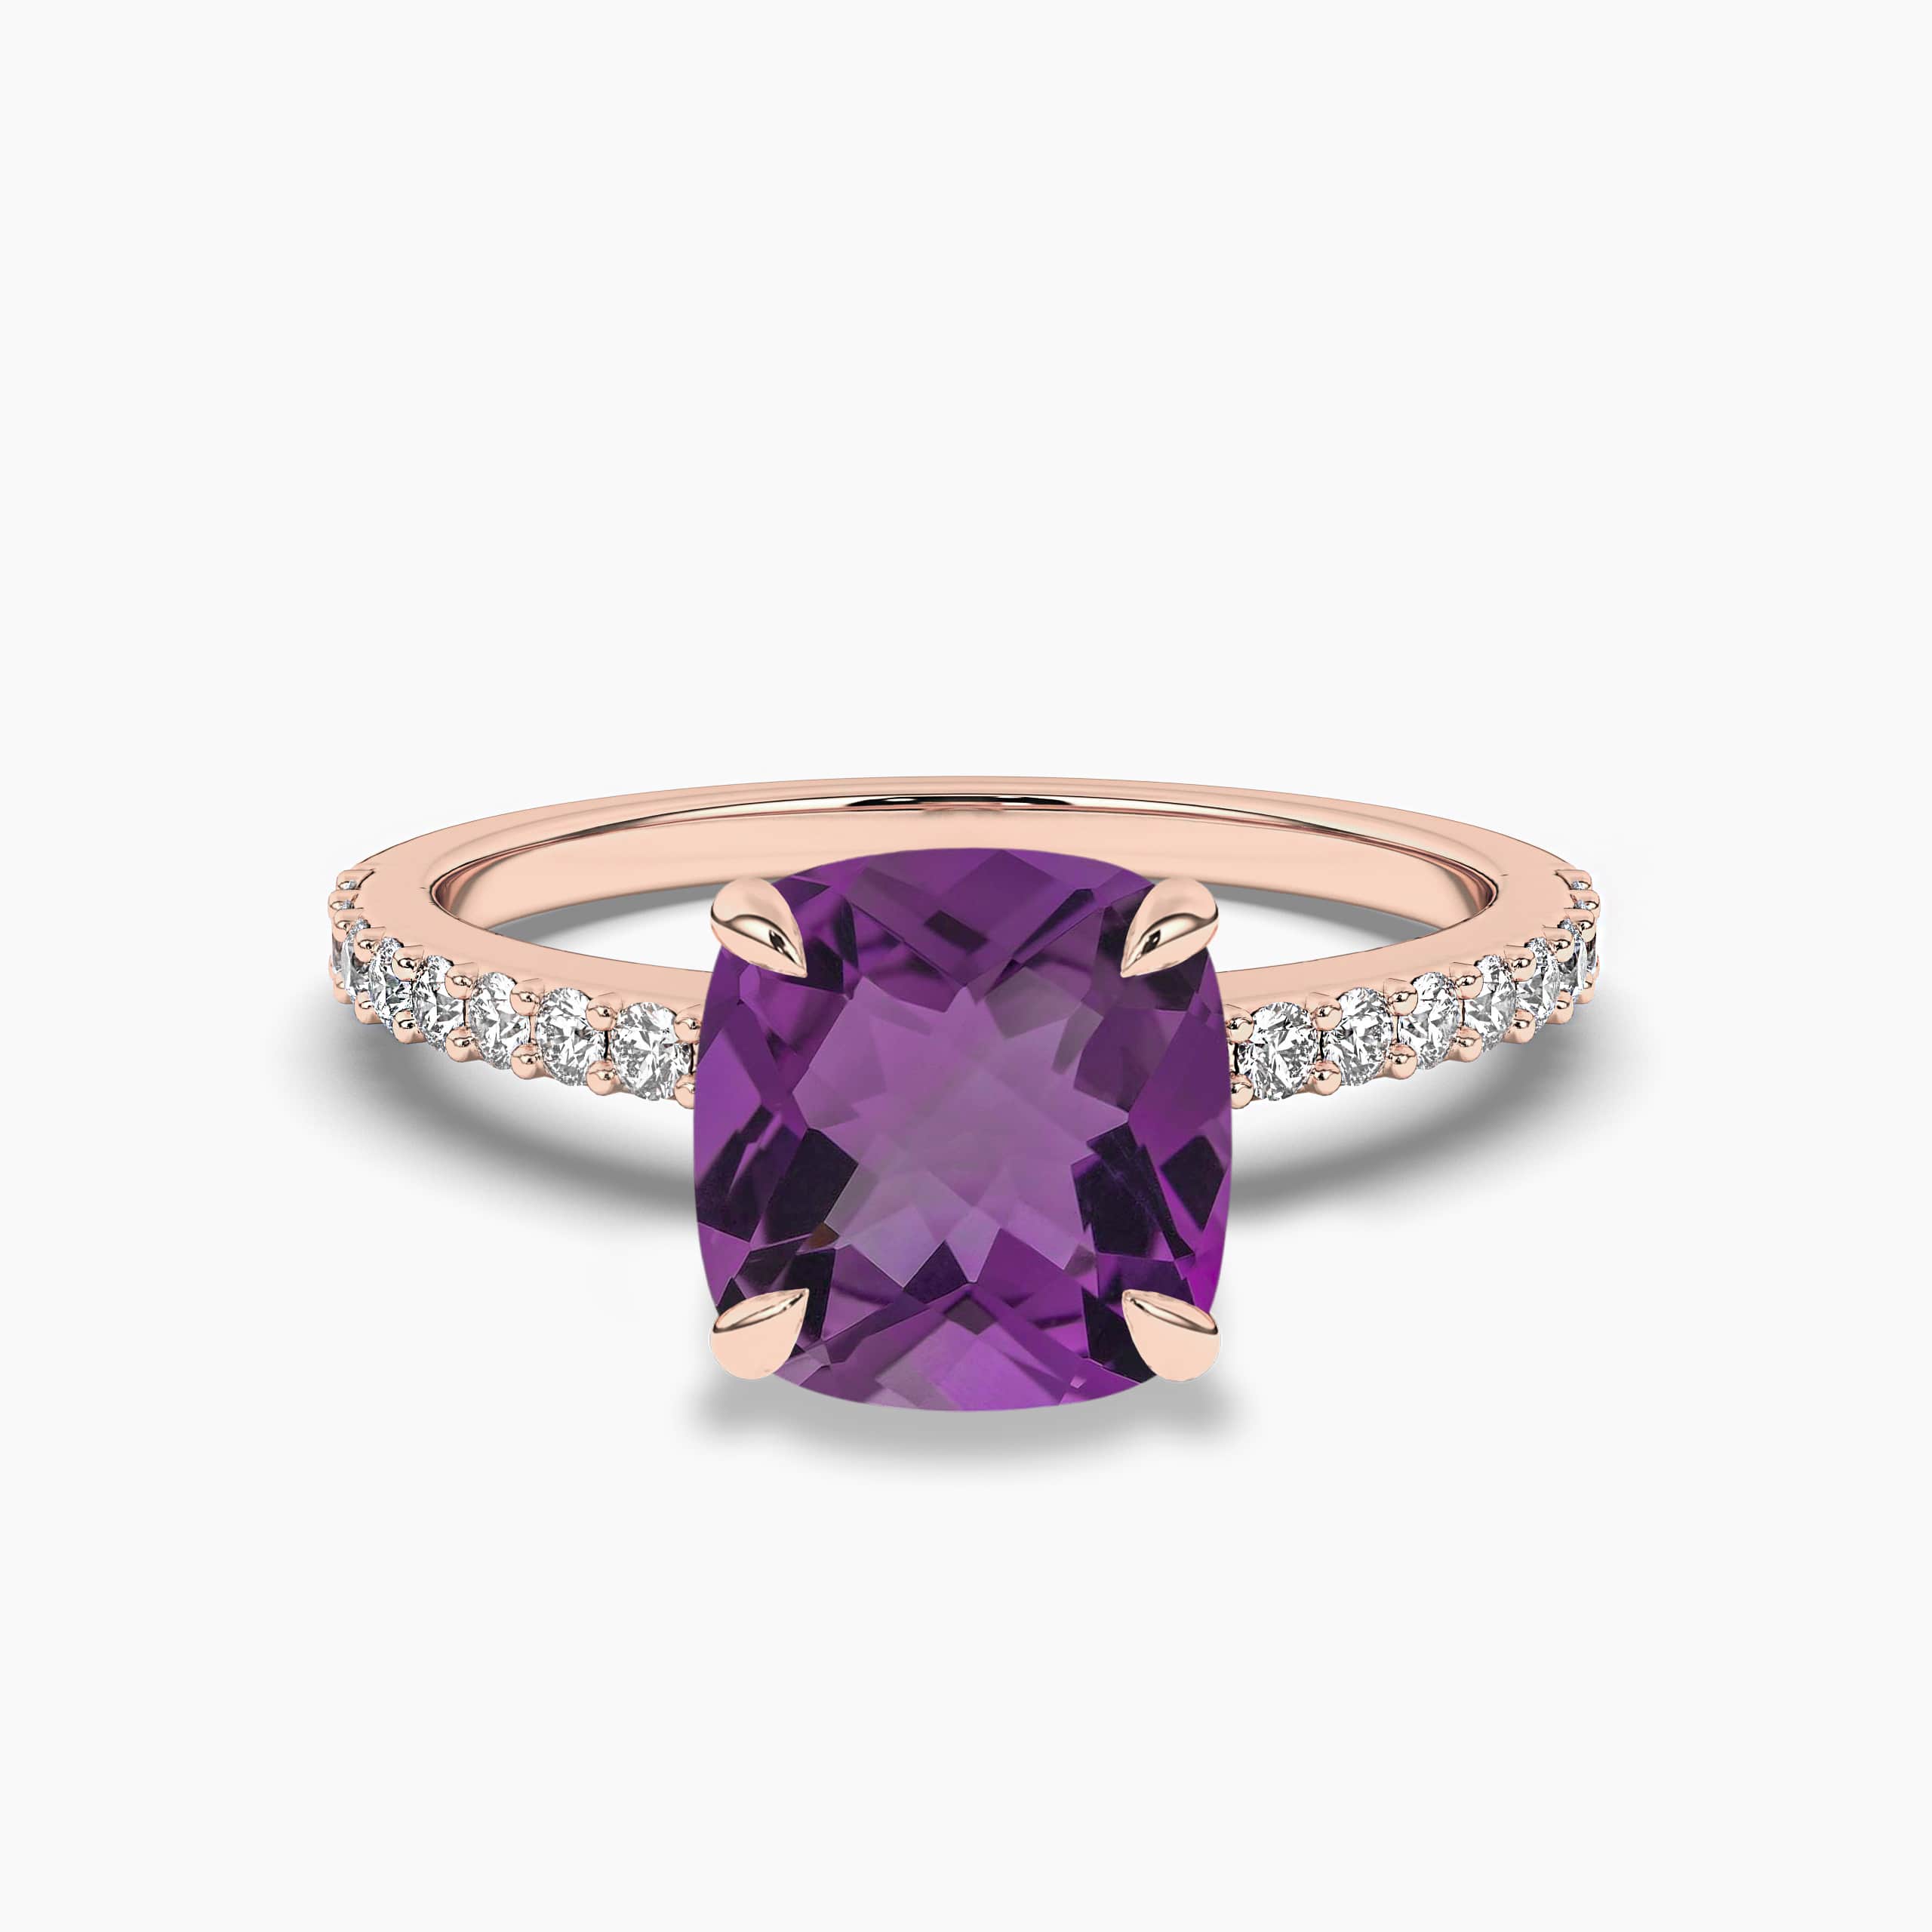 Cushion Cut Amethyst and Diamond Ring in yellow gold